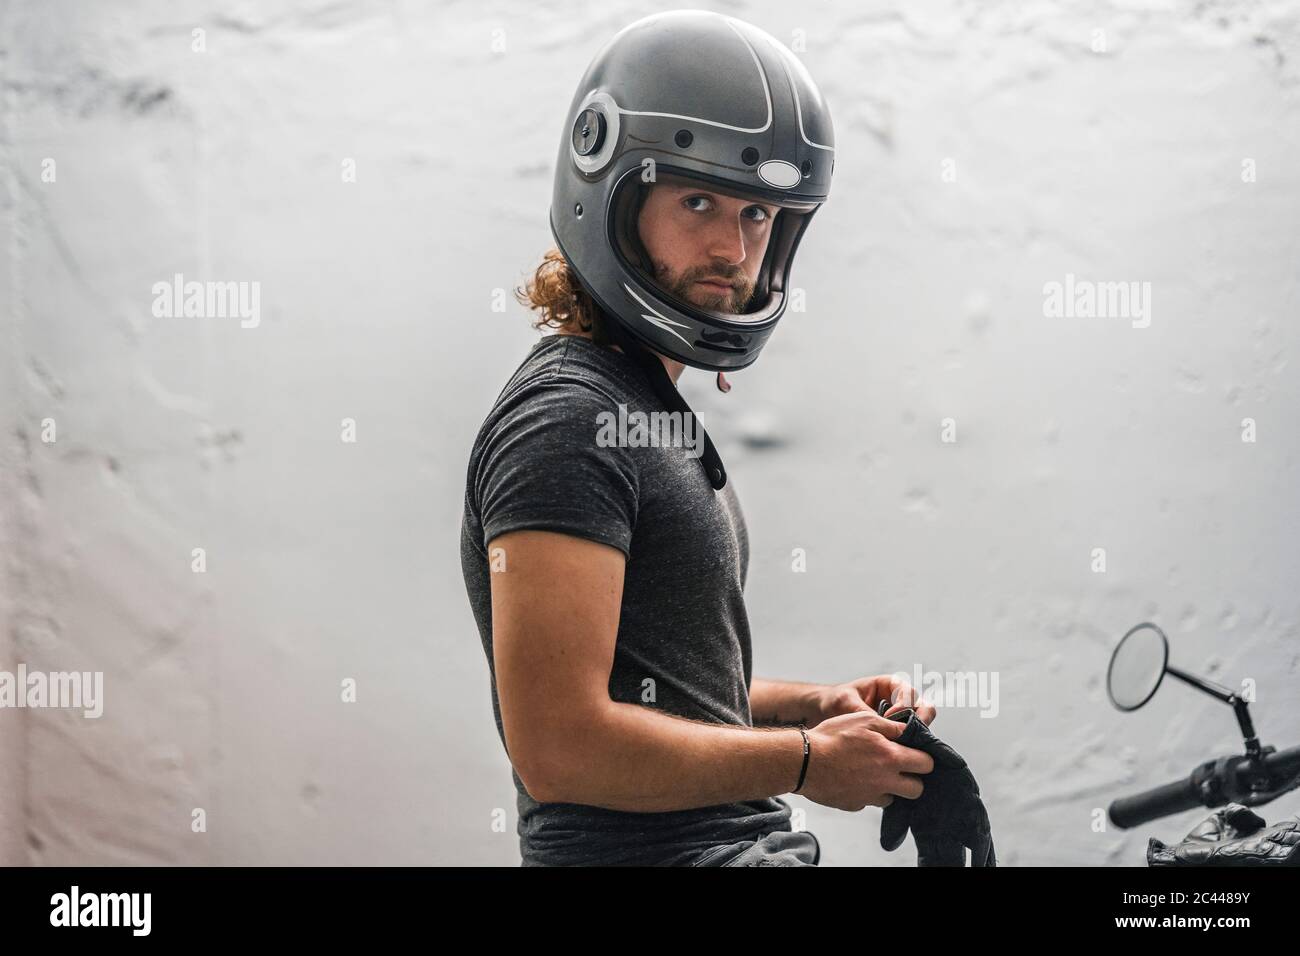 Young man putting on his gloves sitting on motorcycle Stock Photo